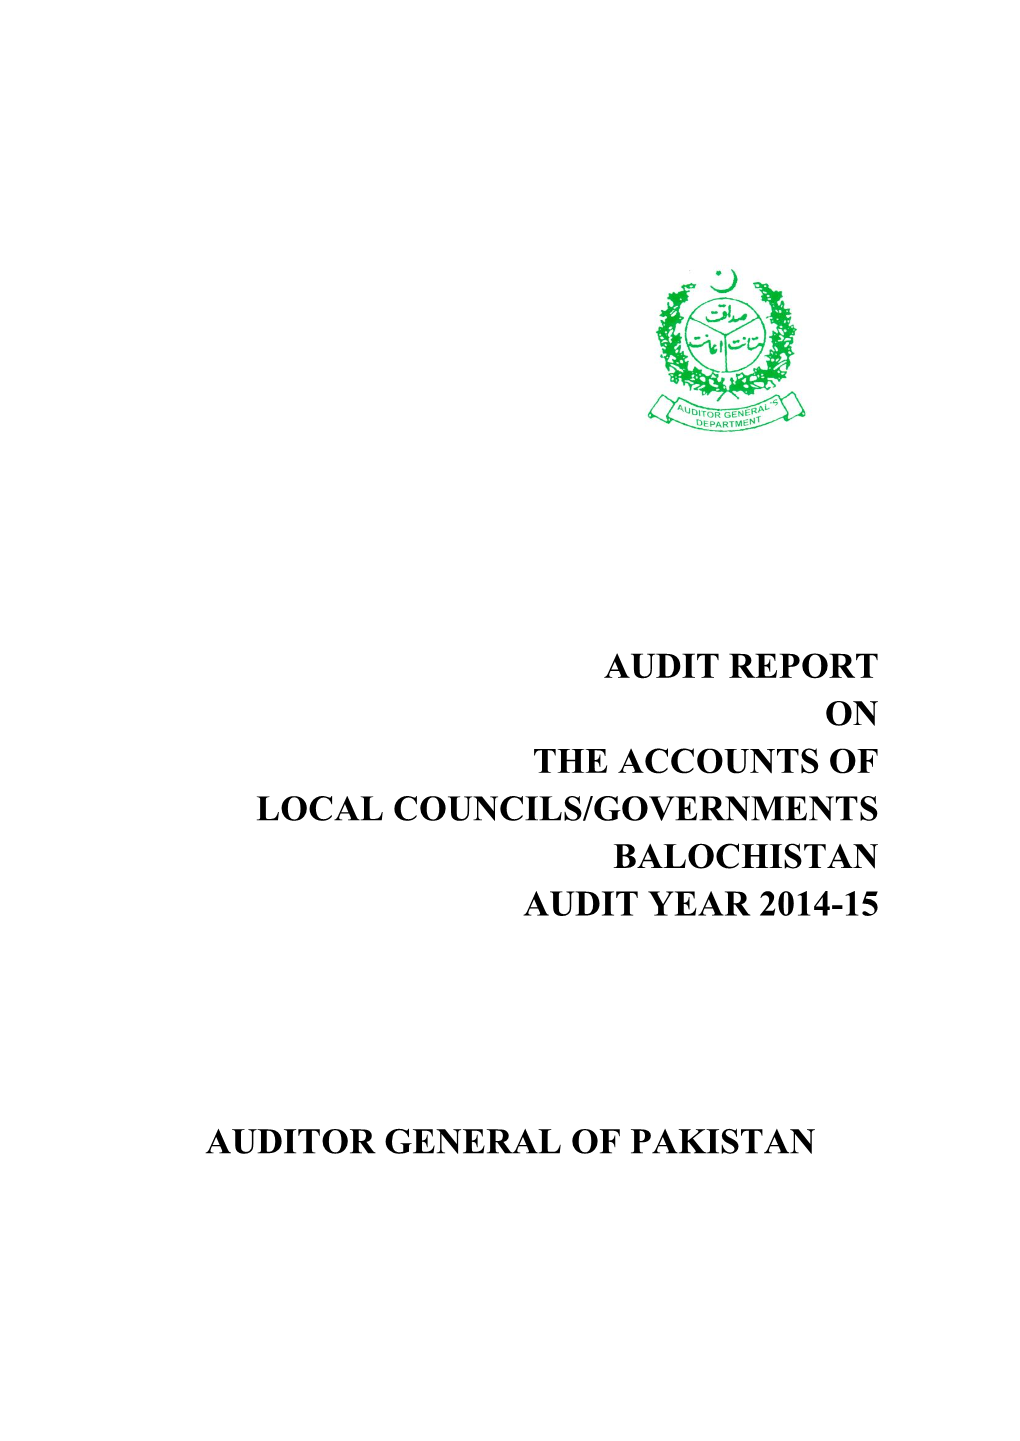 Audit Report on the Accounts of Local Councils/Governments Balochistan Audit Year 2014-15